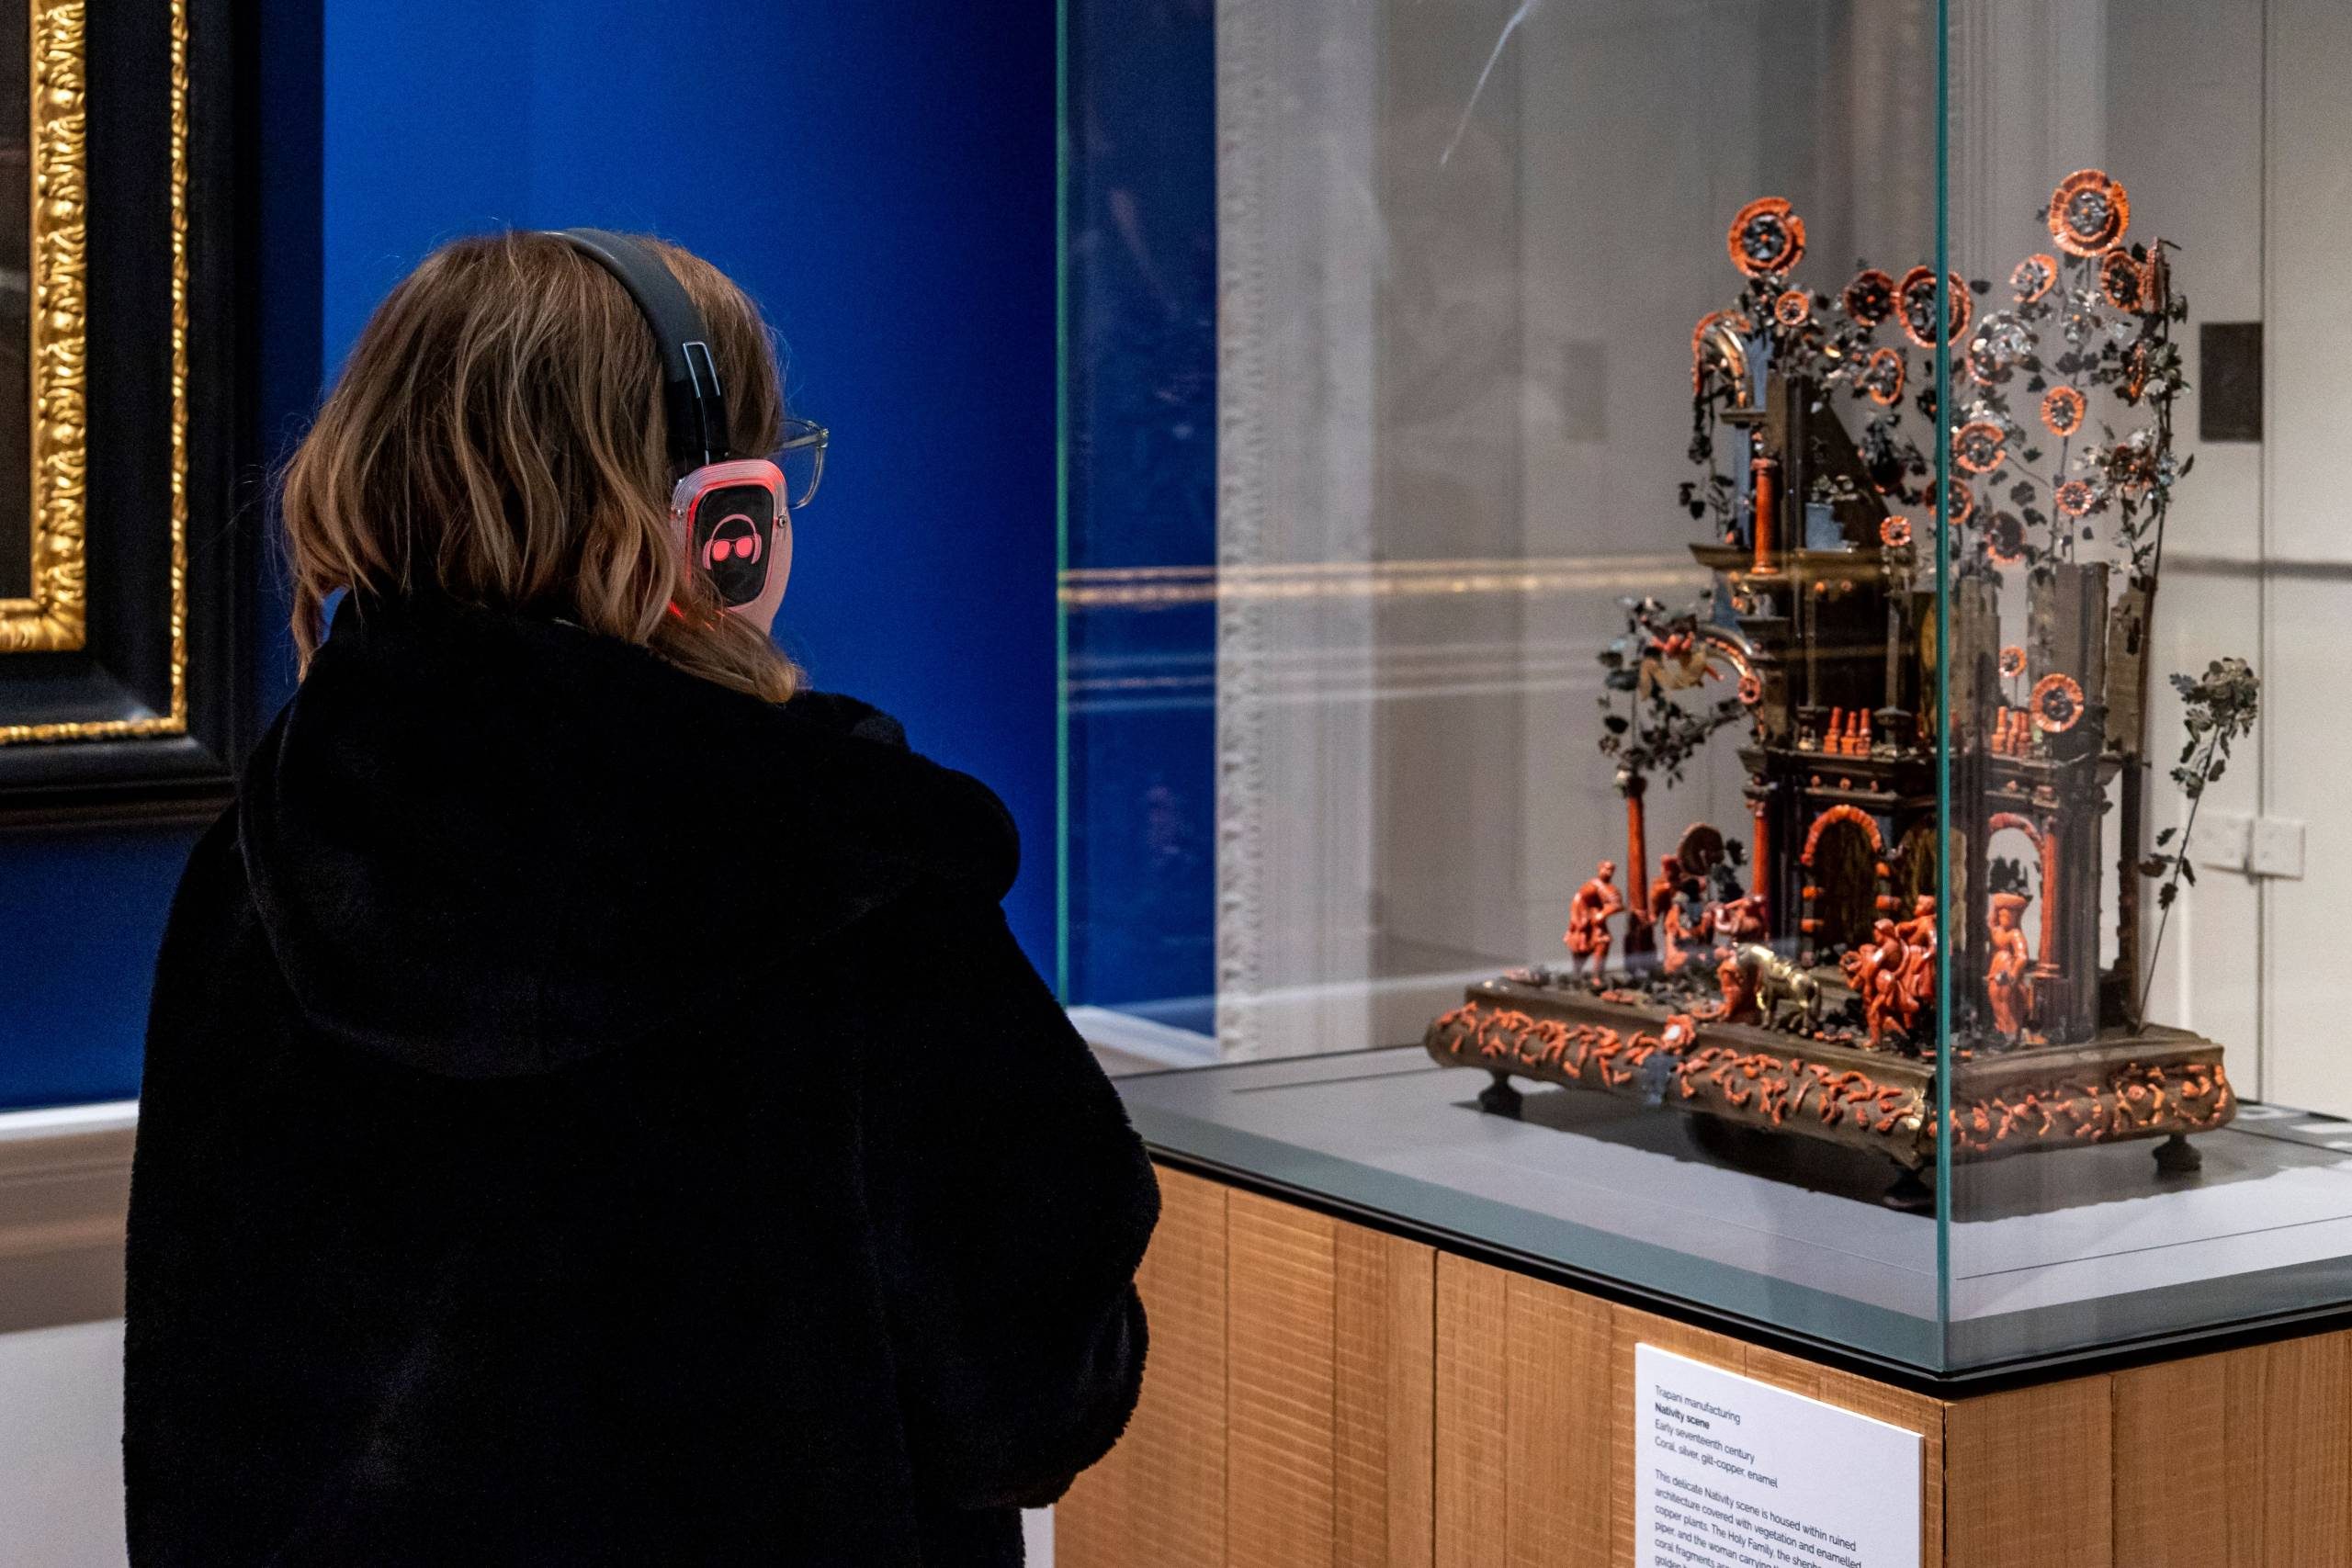 A young girl in a black coat wearing headphones looks at a historical artefact in a glass case in a blue art gallery. The item looks like a religious scene made from bronze and red coral.